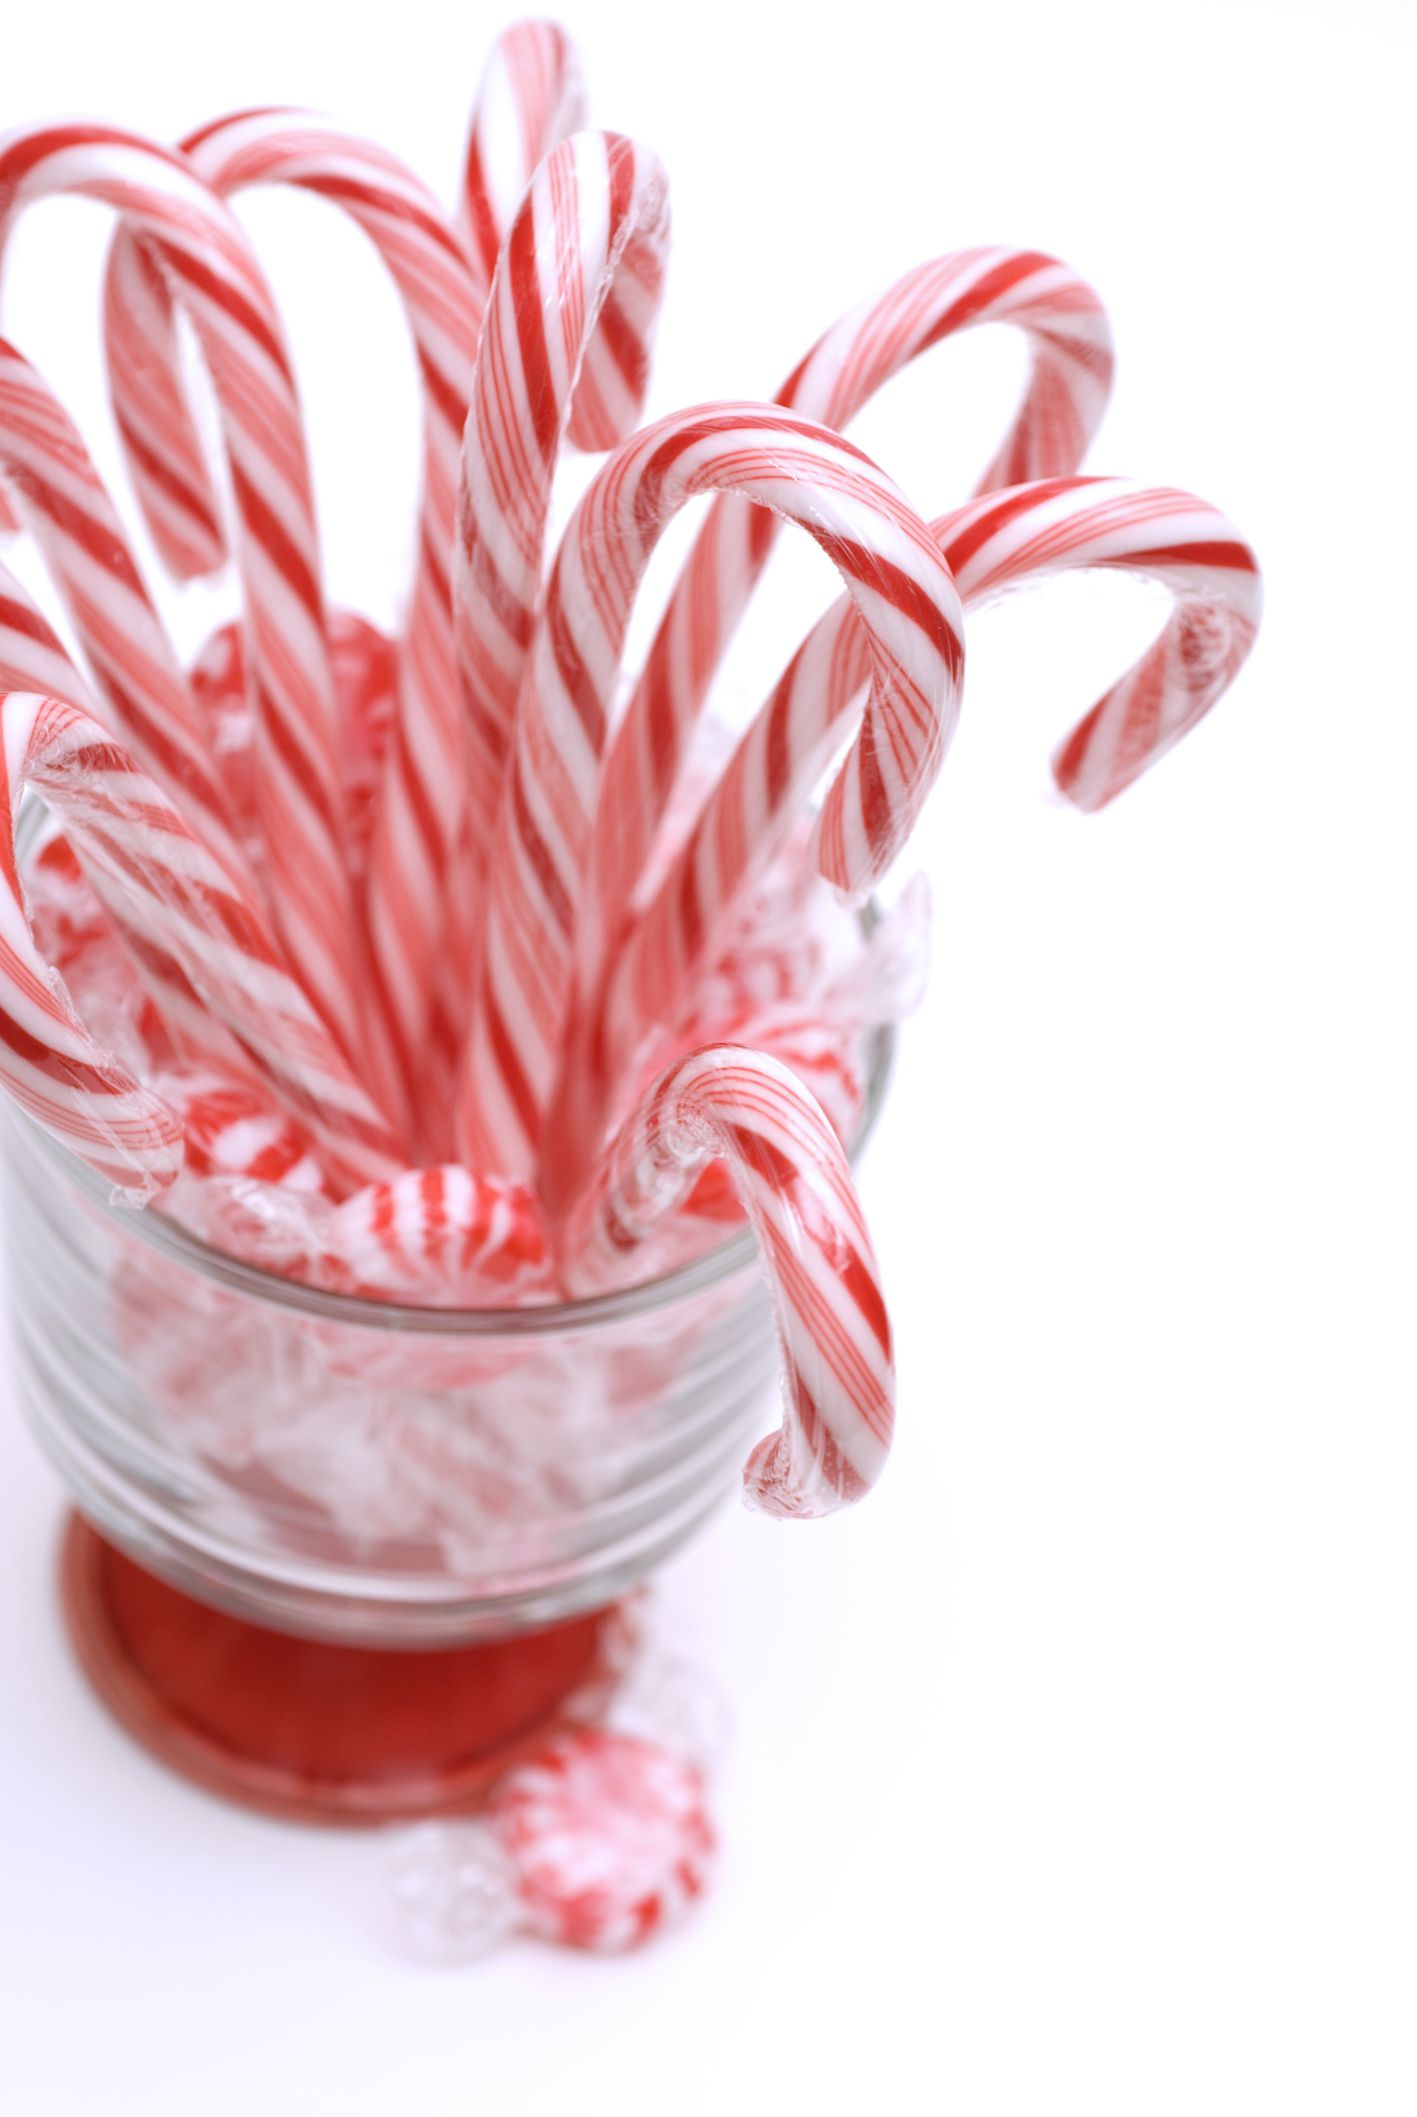 who-invented-candy-canes